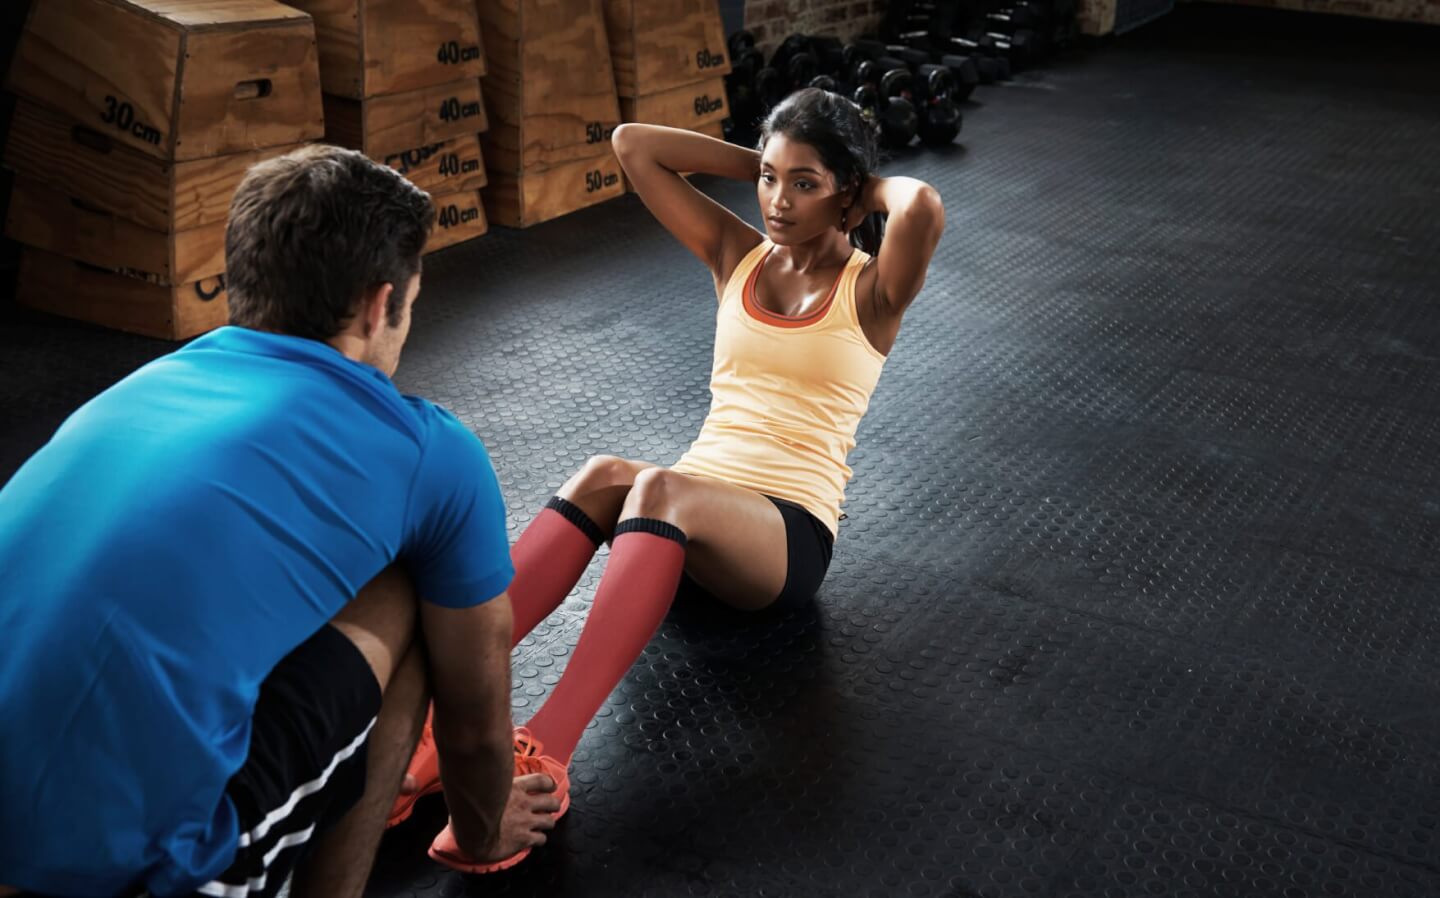 benefits of personal training